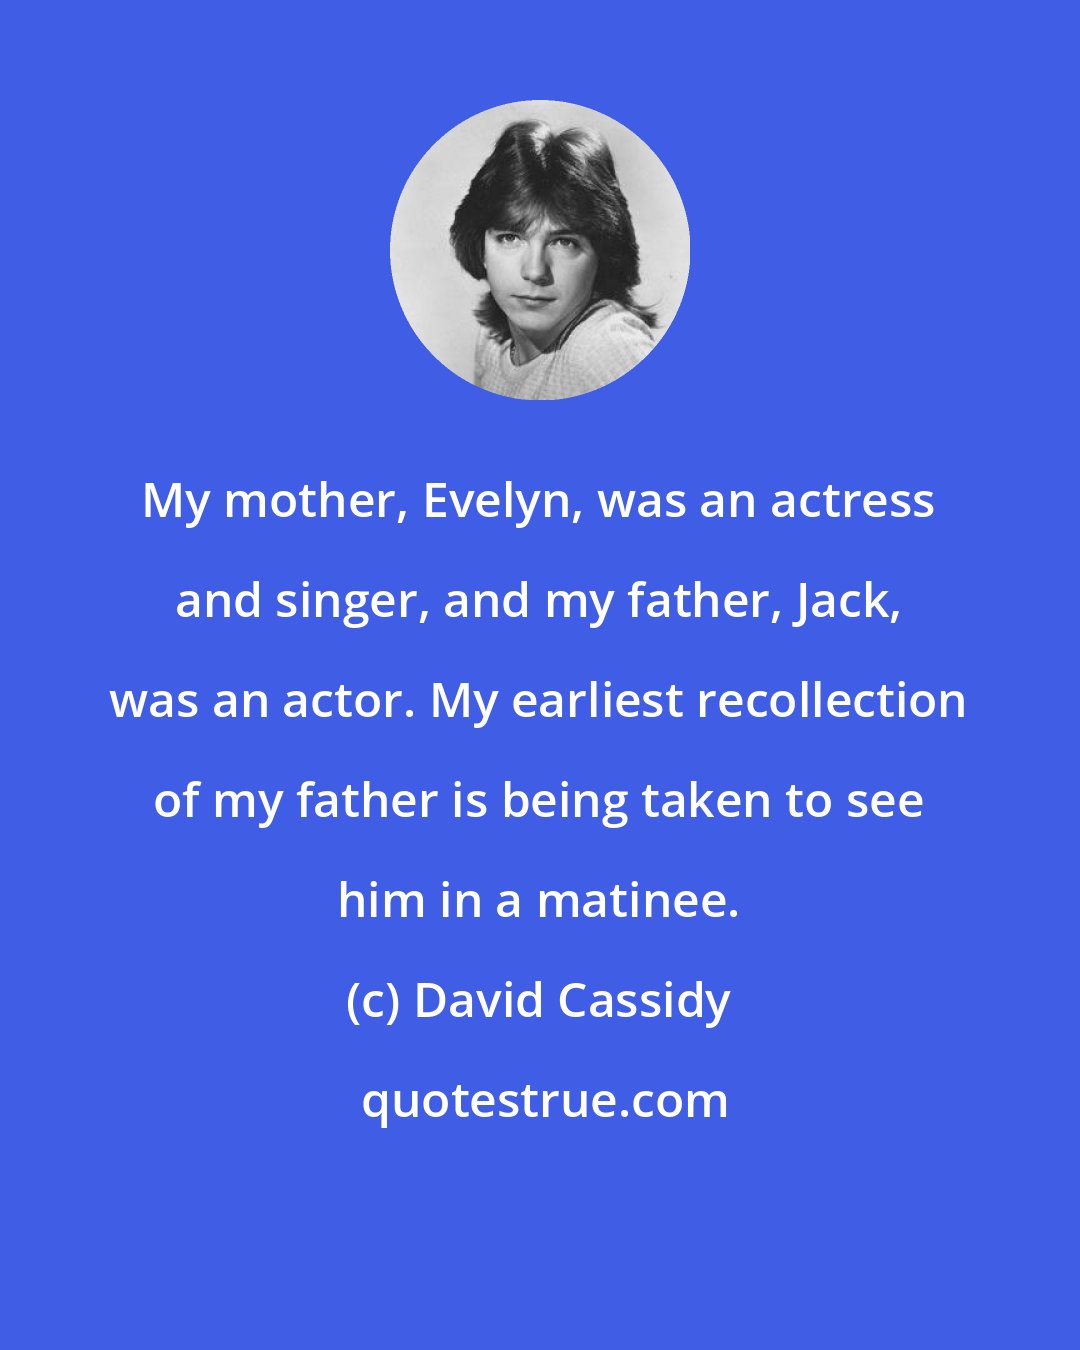 David Cassidy: My mother, Evelyn, was an actress and singer, and my father, Jack, was an actor. My earliest recollection of my father is being taken to see him in a matinee.